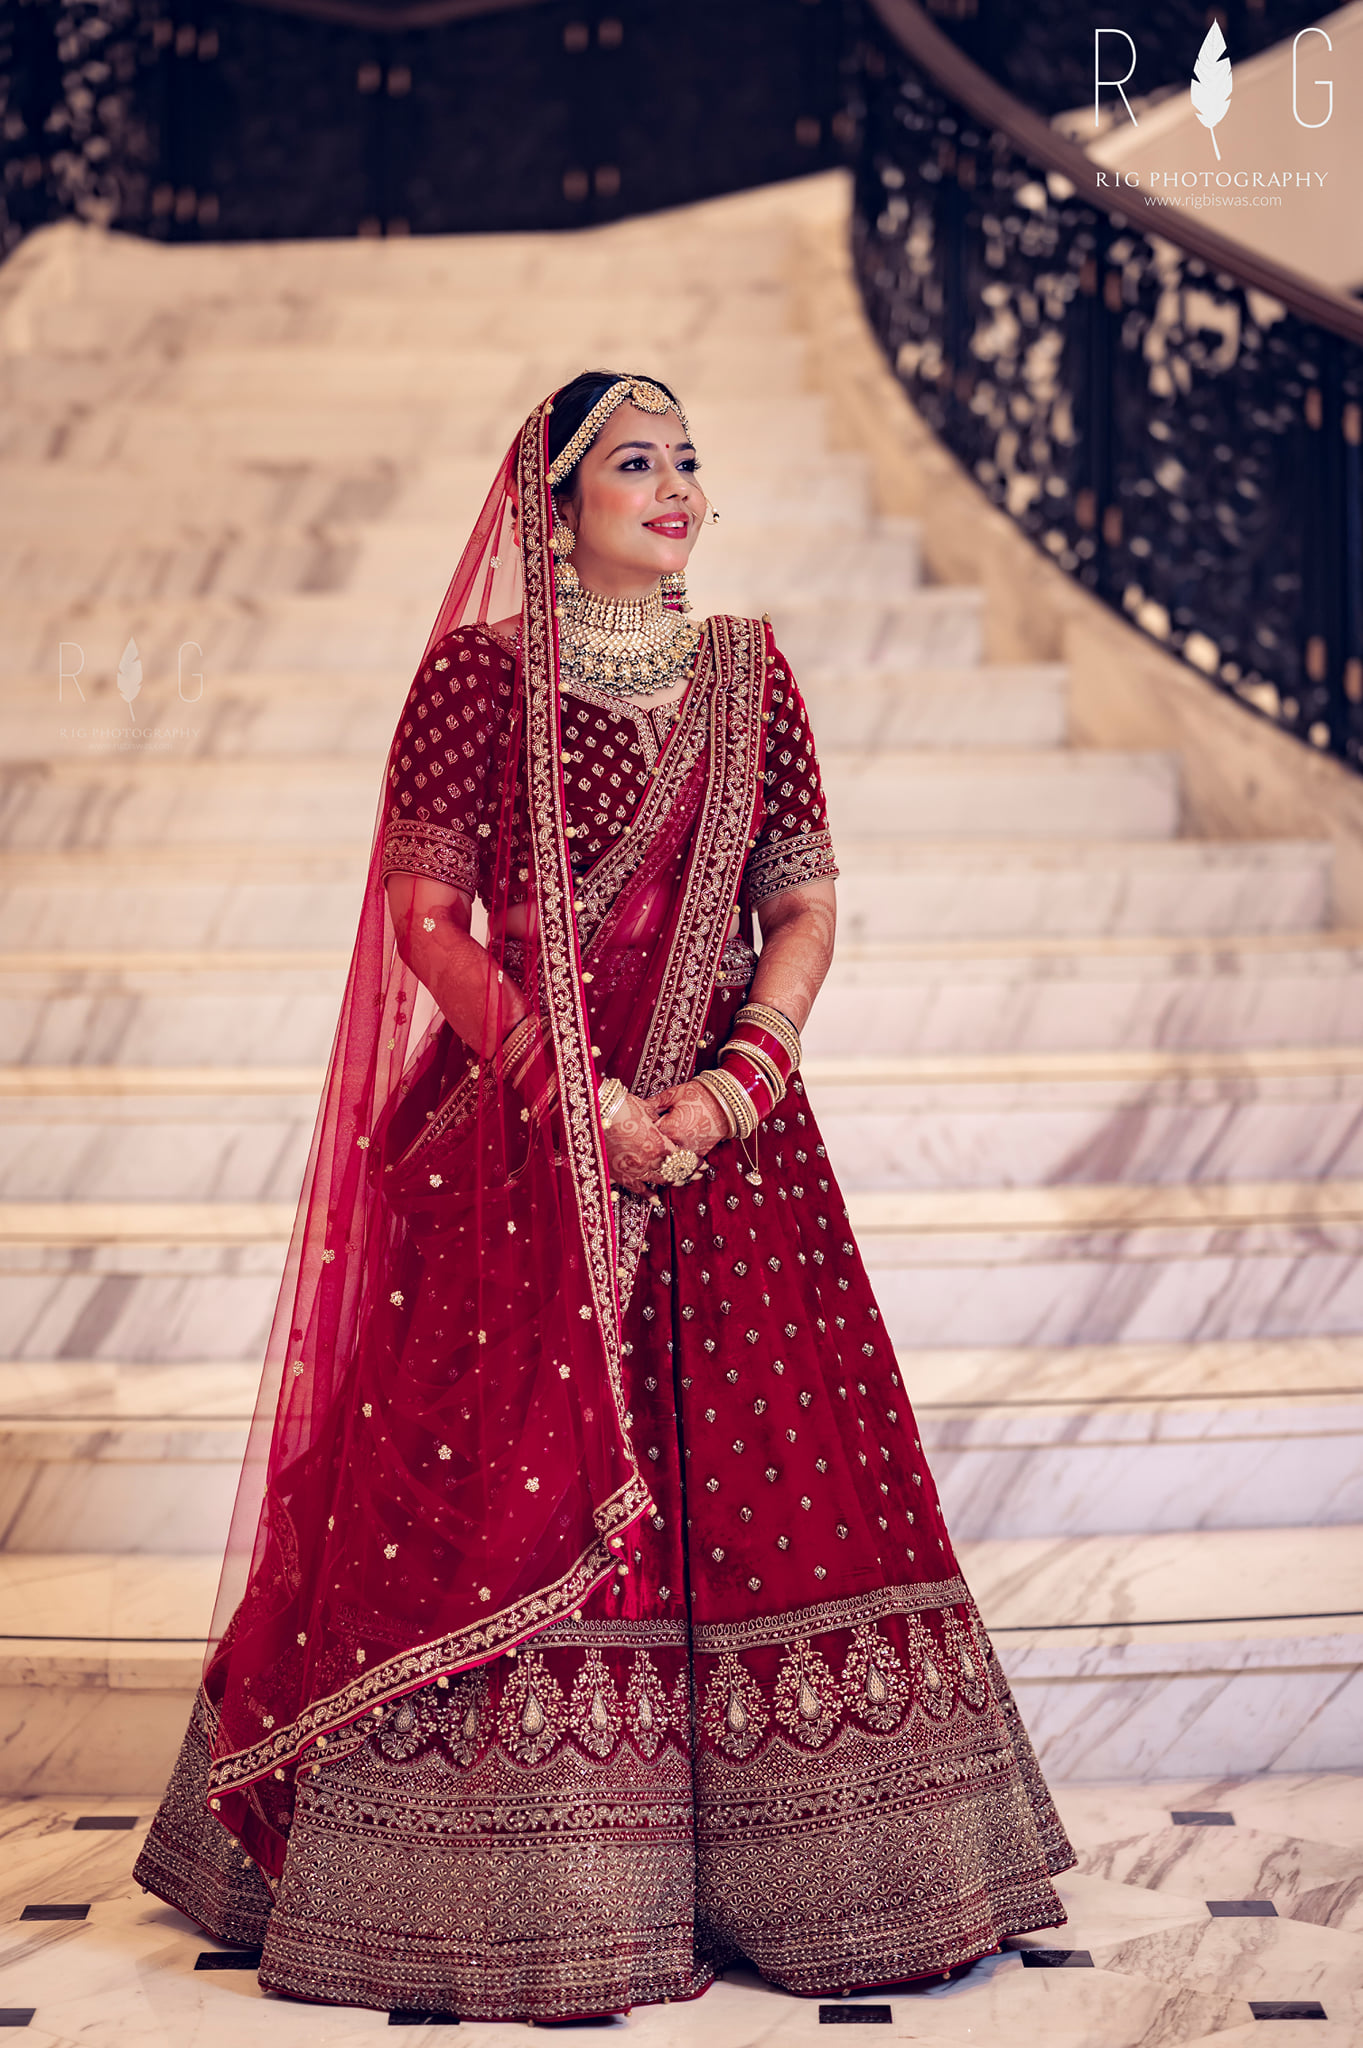 Here Are Some Dazzling Indian Bridal Photoshoot Poses for Every Brides  Wedding Album